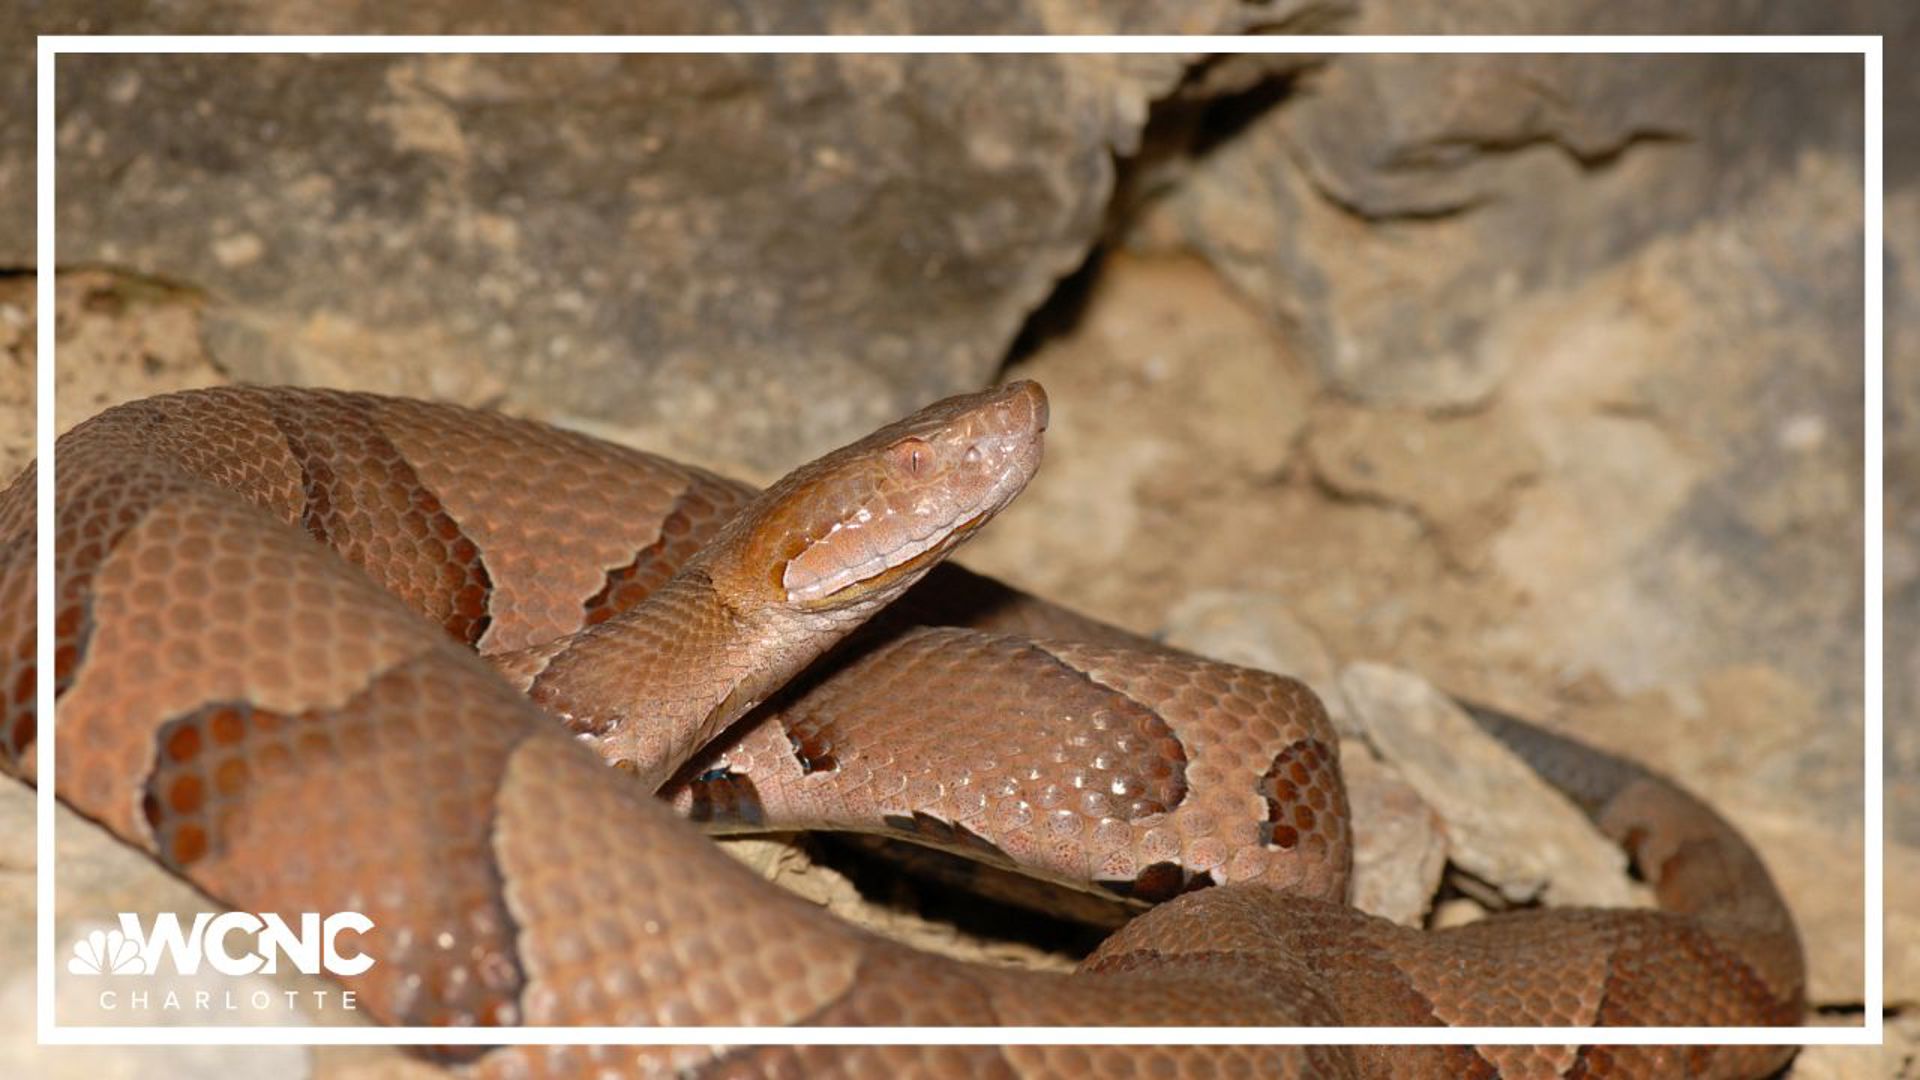 According to WakeMed, the hospital has treated nine patients for snake bites since June 1, and six needed anti-venom.